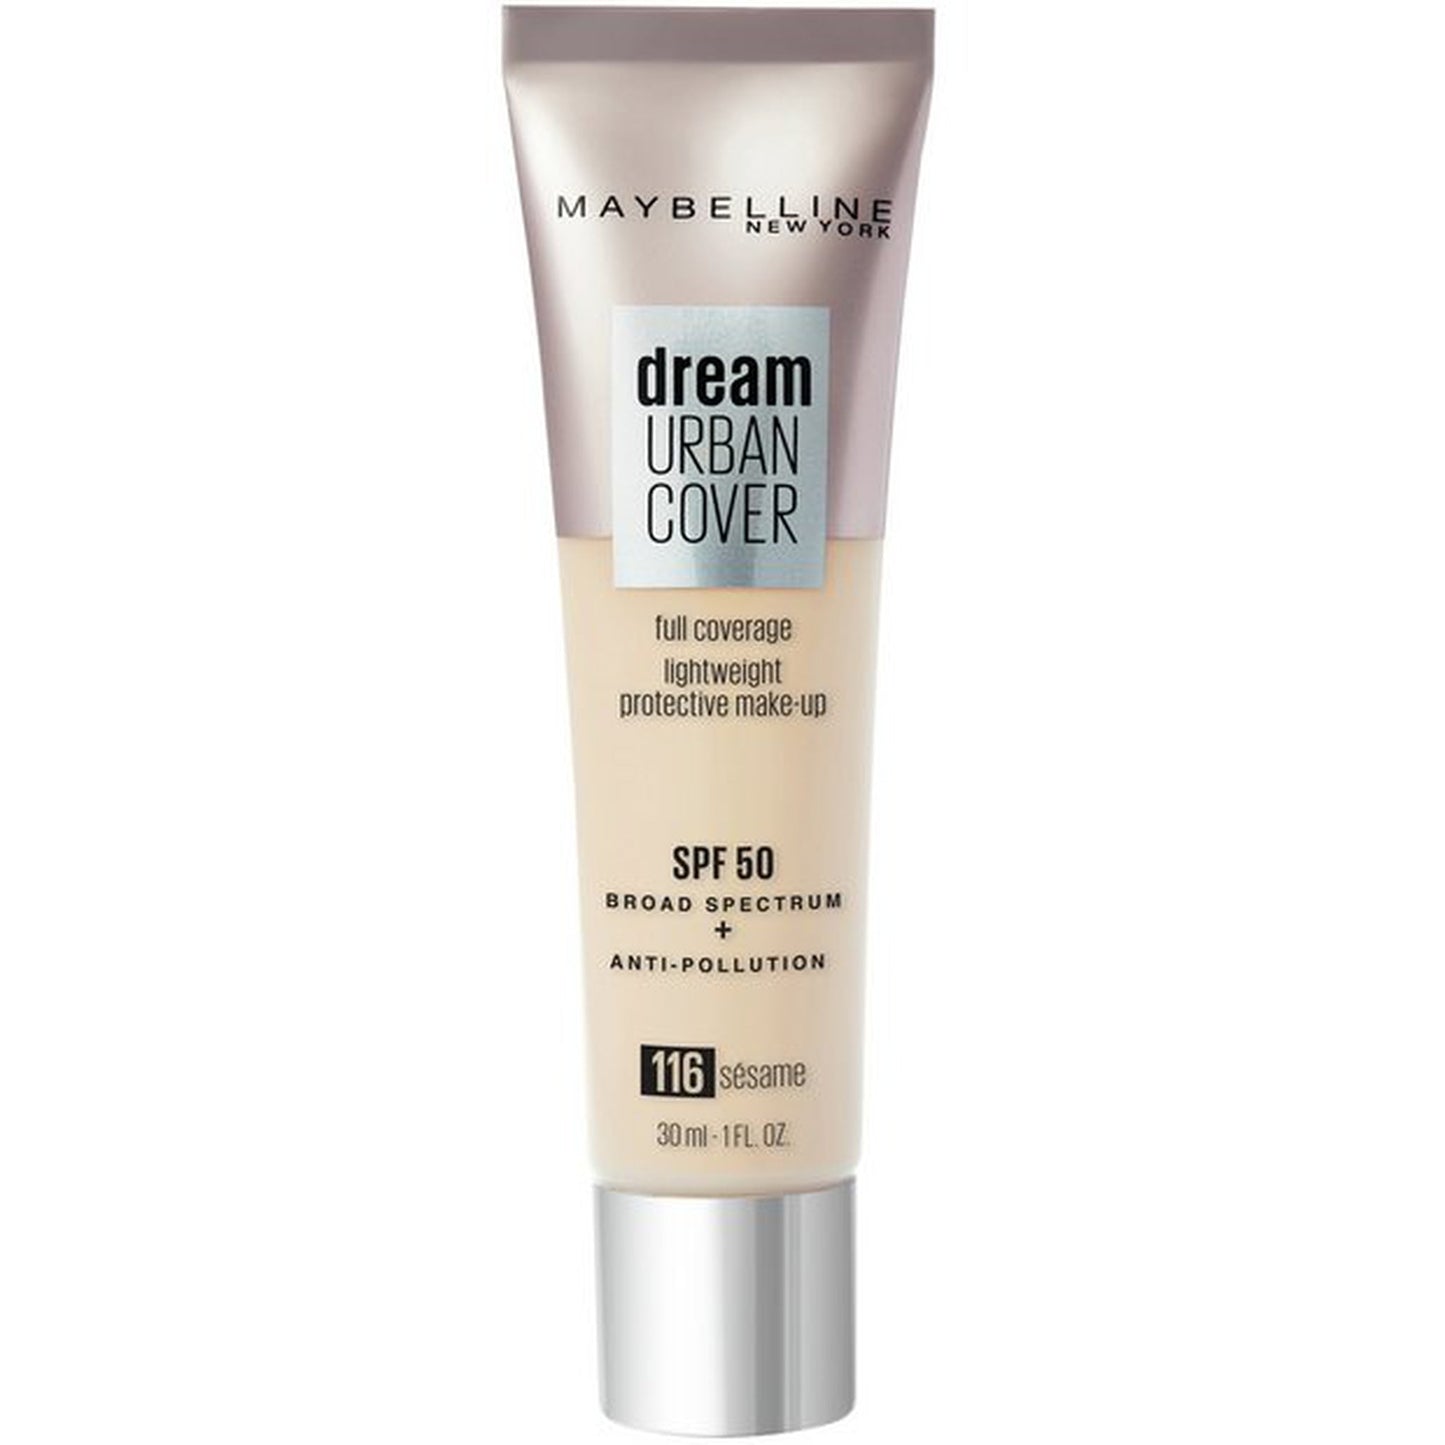 Maybeline Dream Urban Cover Foundation SPF50 - 116 Sesame-Maybelline-BeautyNmakeup.co.uk